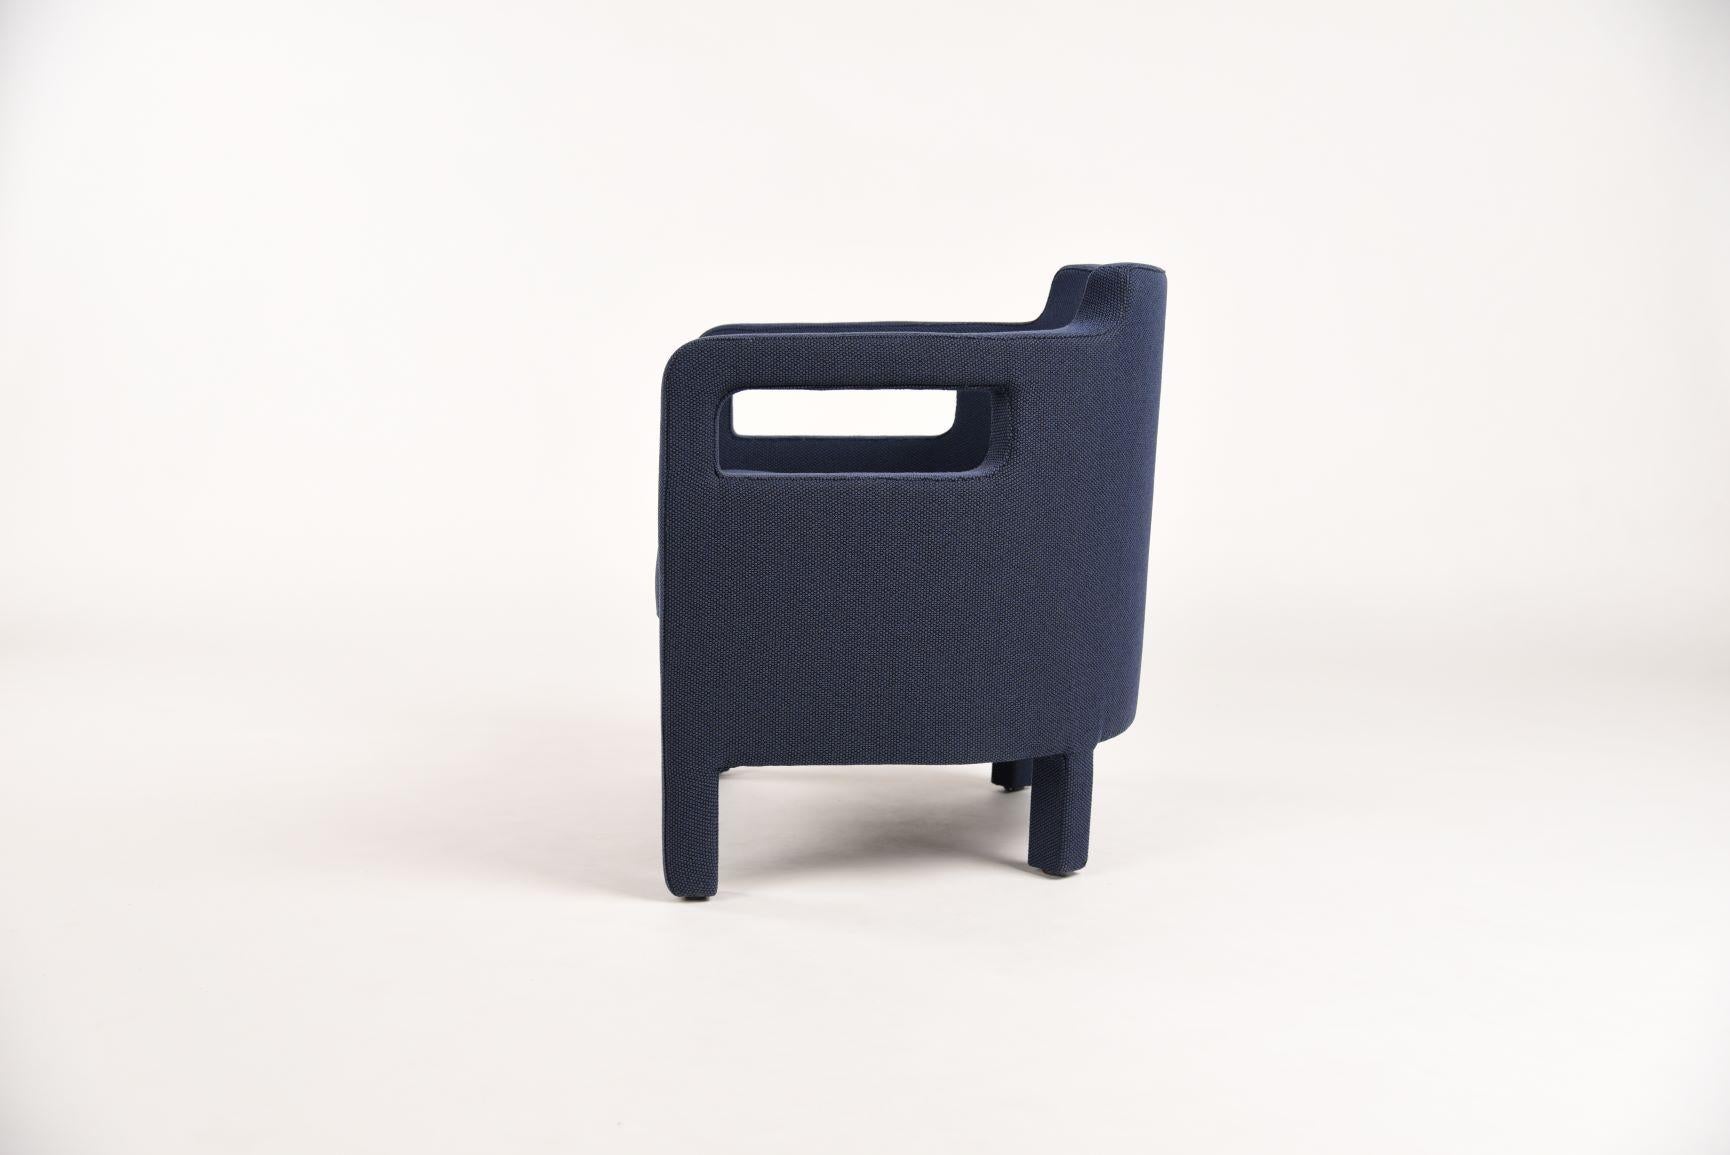 The unique profile of the fully upholstered Jinbao Street lounge chair by Yabu Pushelberg has their signature soft-minimal aesthetic. The solid wood frame can be upholstered in your choice of fabric or leather. The foam seat can be customized for